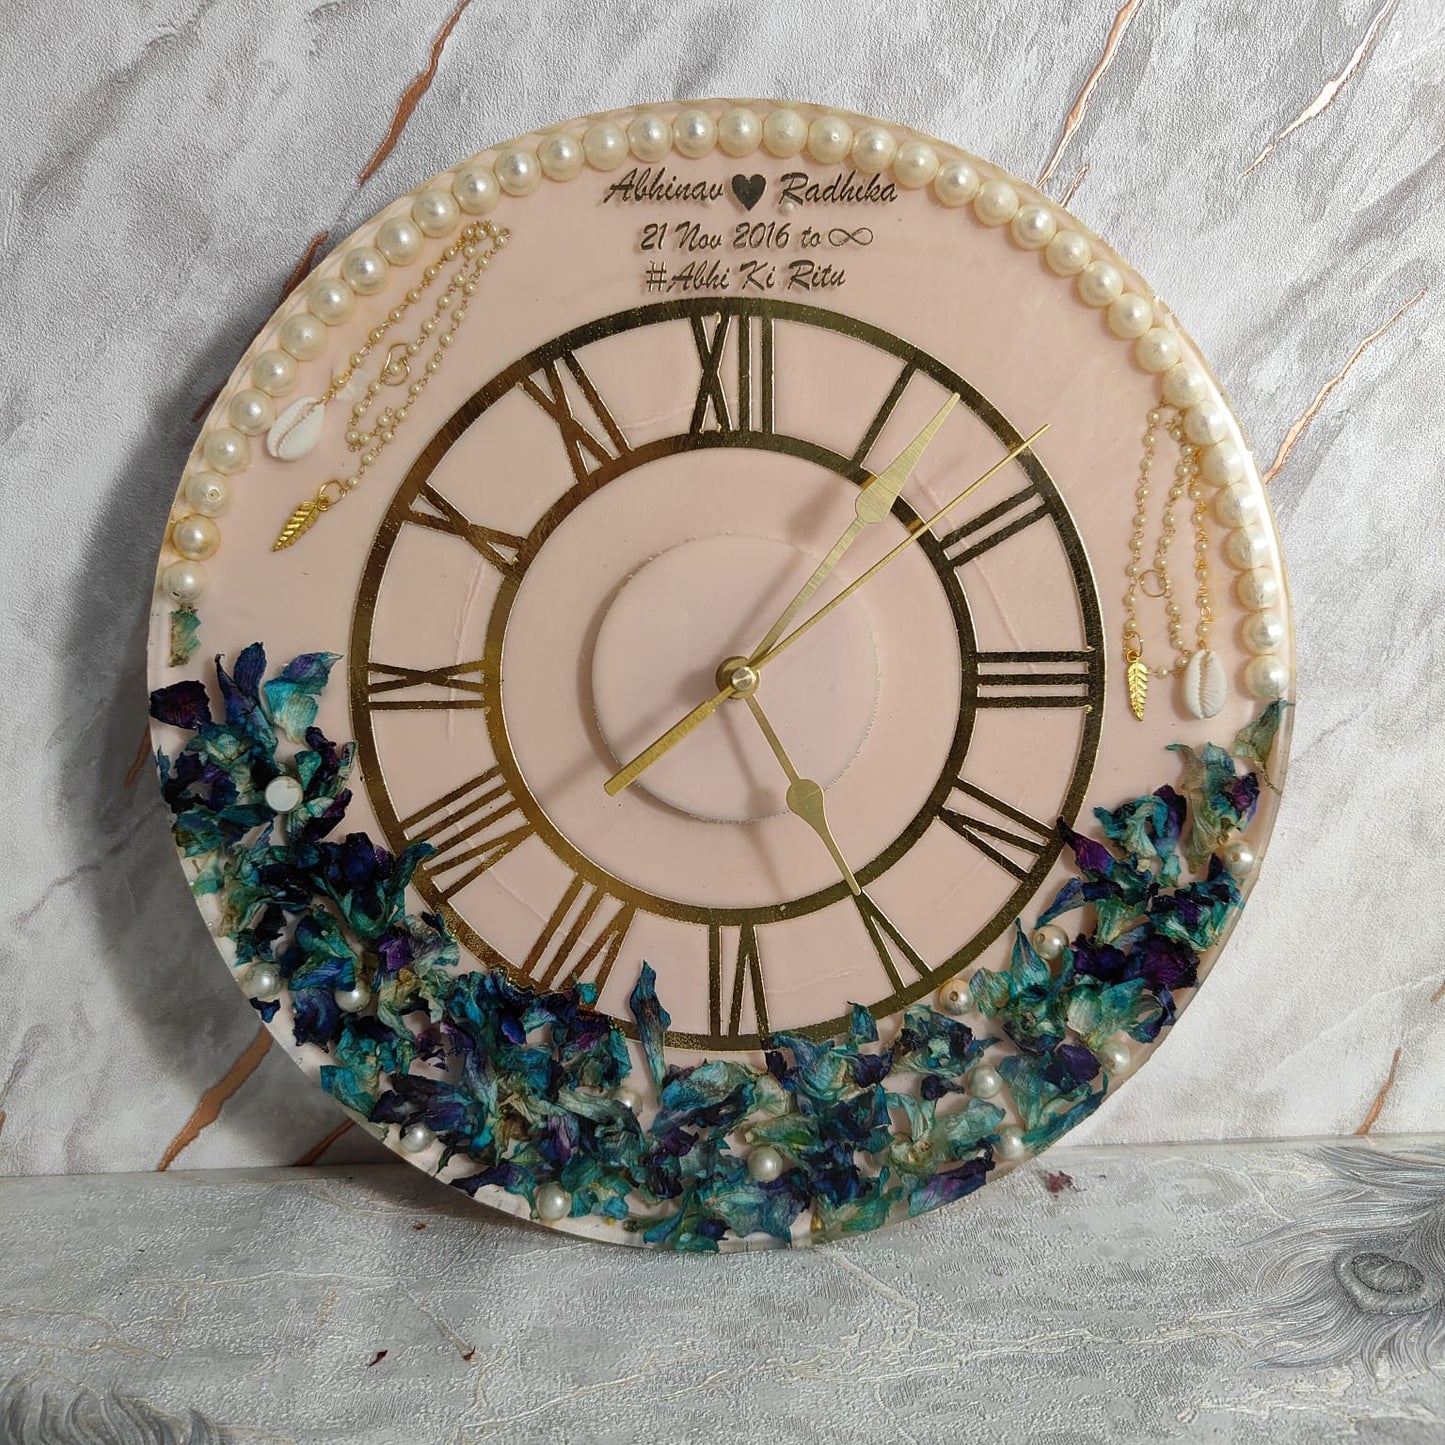 Resin Dual Color Varmala Flower Wall Clock | Wedding Garland Preservation in Clock | Decor Your Home with Personalized Wedding Touch (12 Inch), Ideal Gift for Newly Wedded